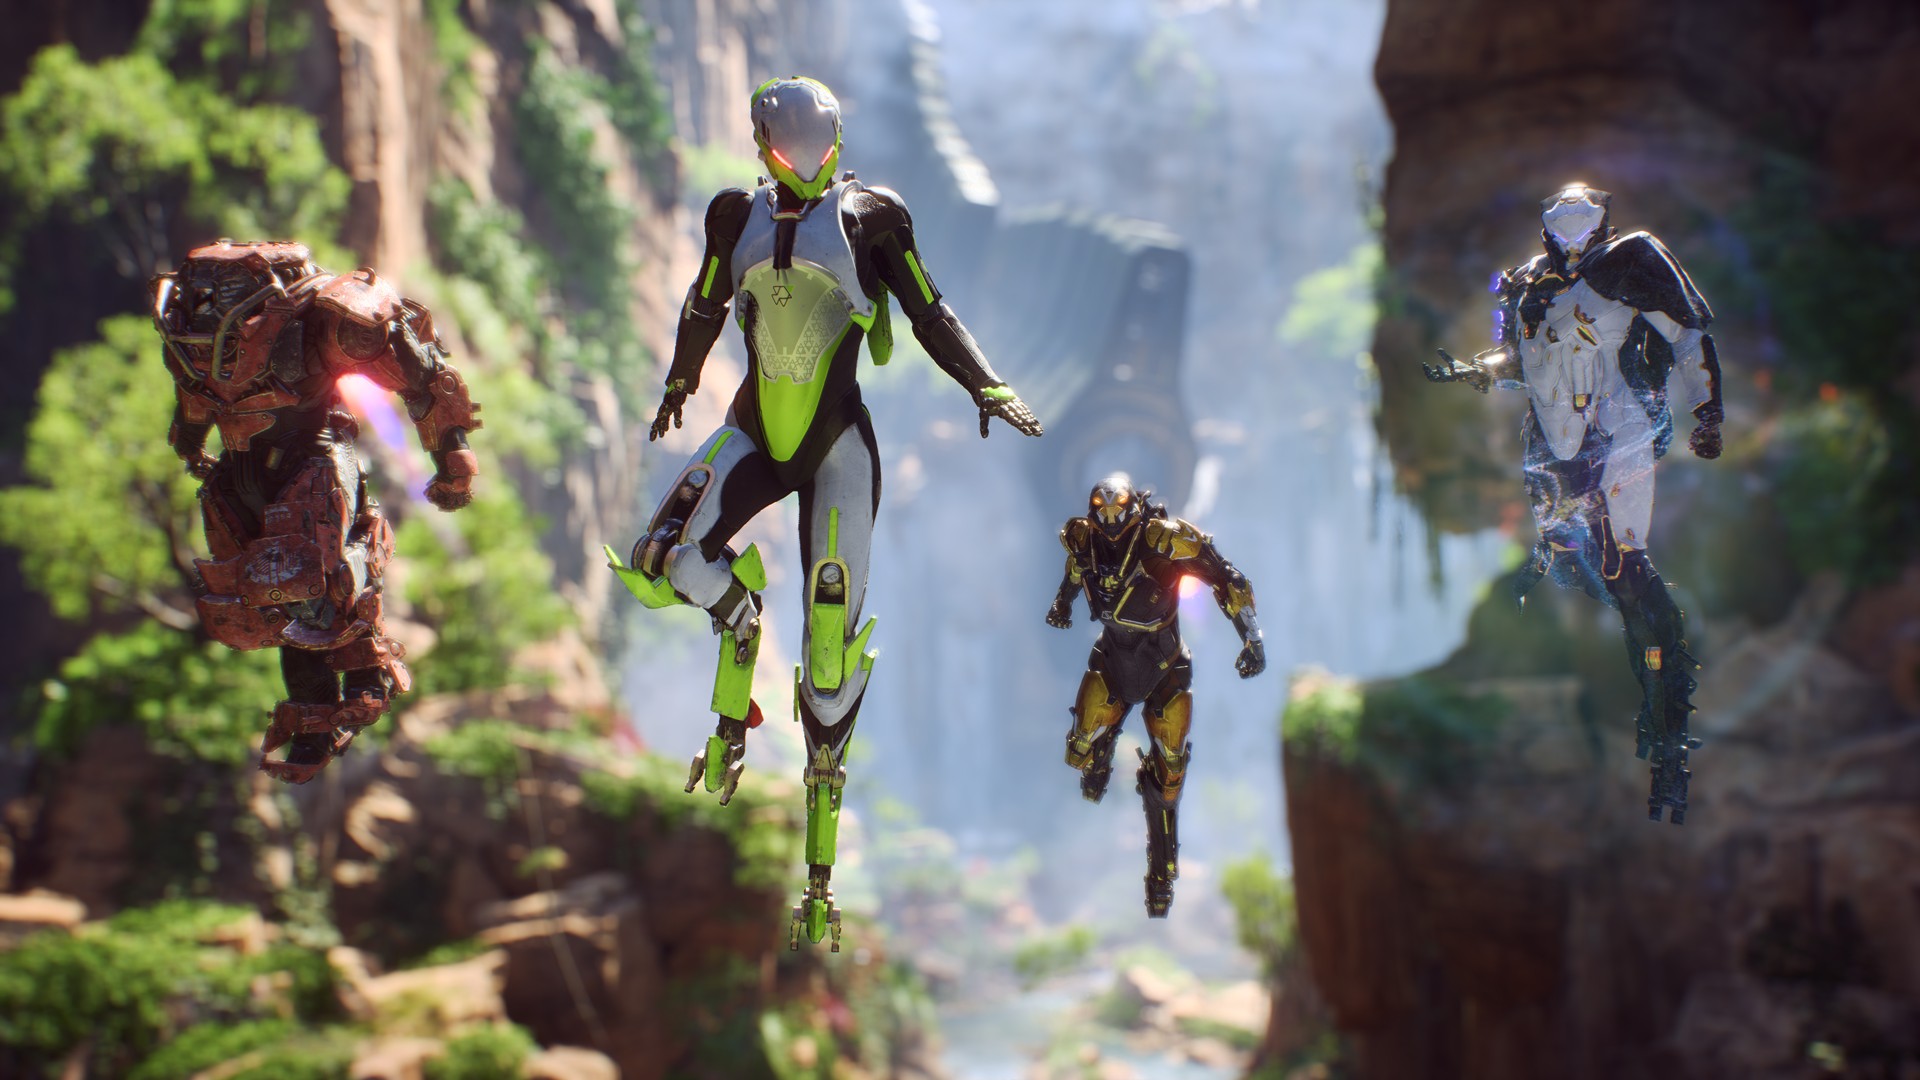 Anthem Open Demo on February 1-3 for Xbox One Screen-1-1080.jpg